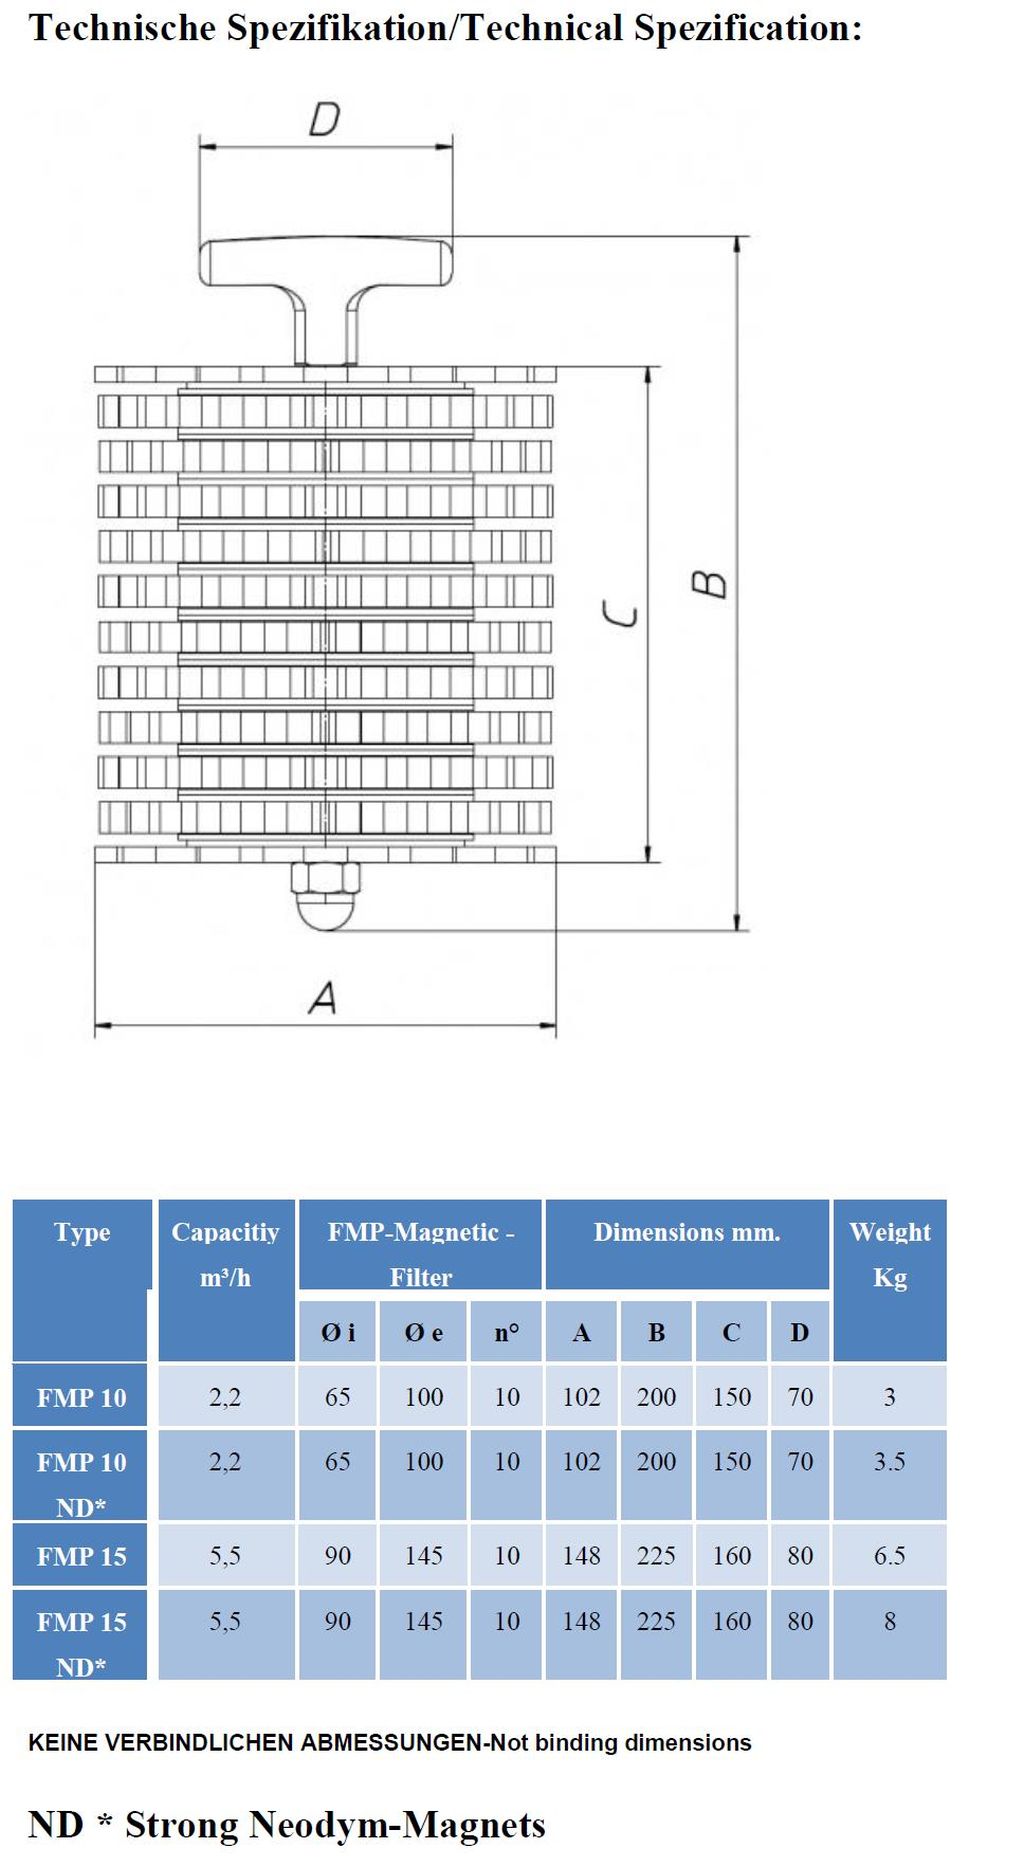 FMP PERMANENT MAGNETIC FILTER DRAWING AND DIMENSIONS SHEET